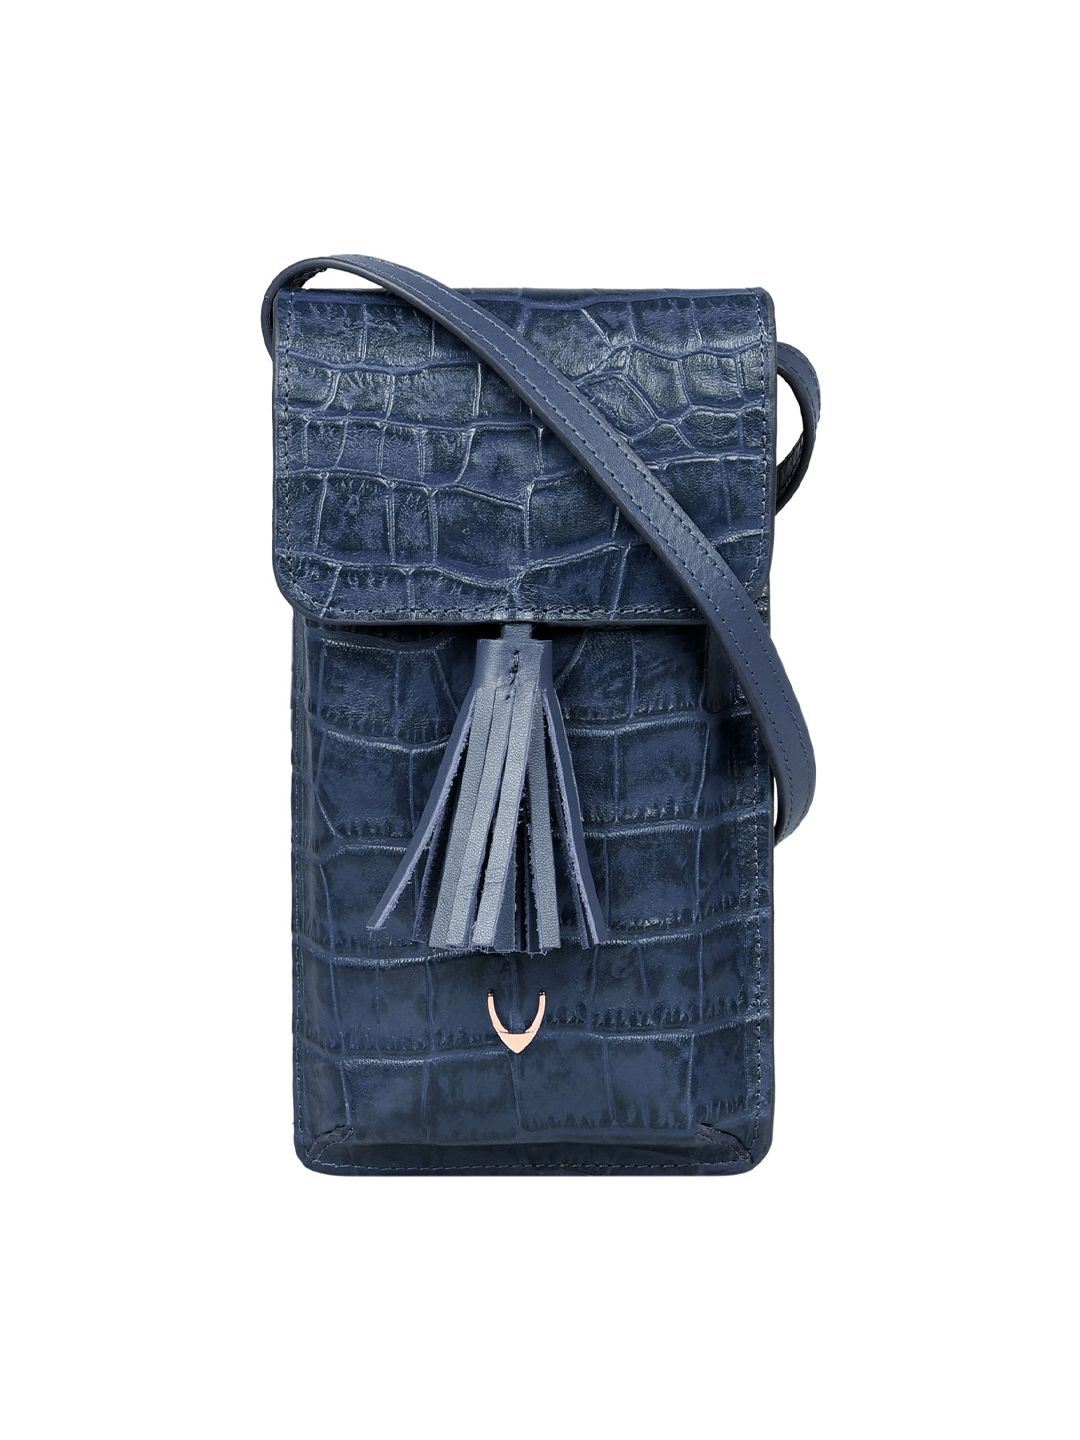 Hidesign Women Blue Textured Leather Card Holder Price in India